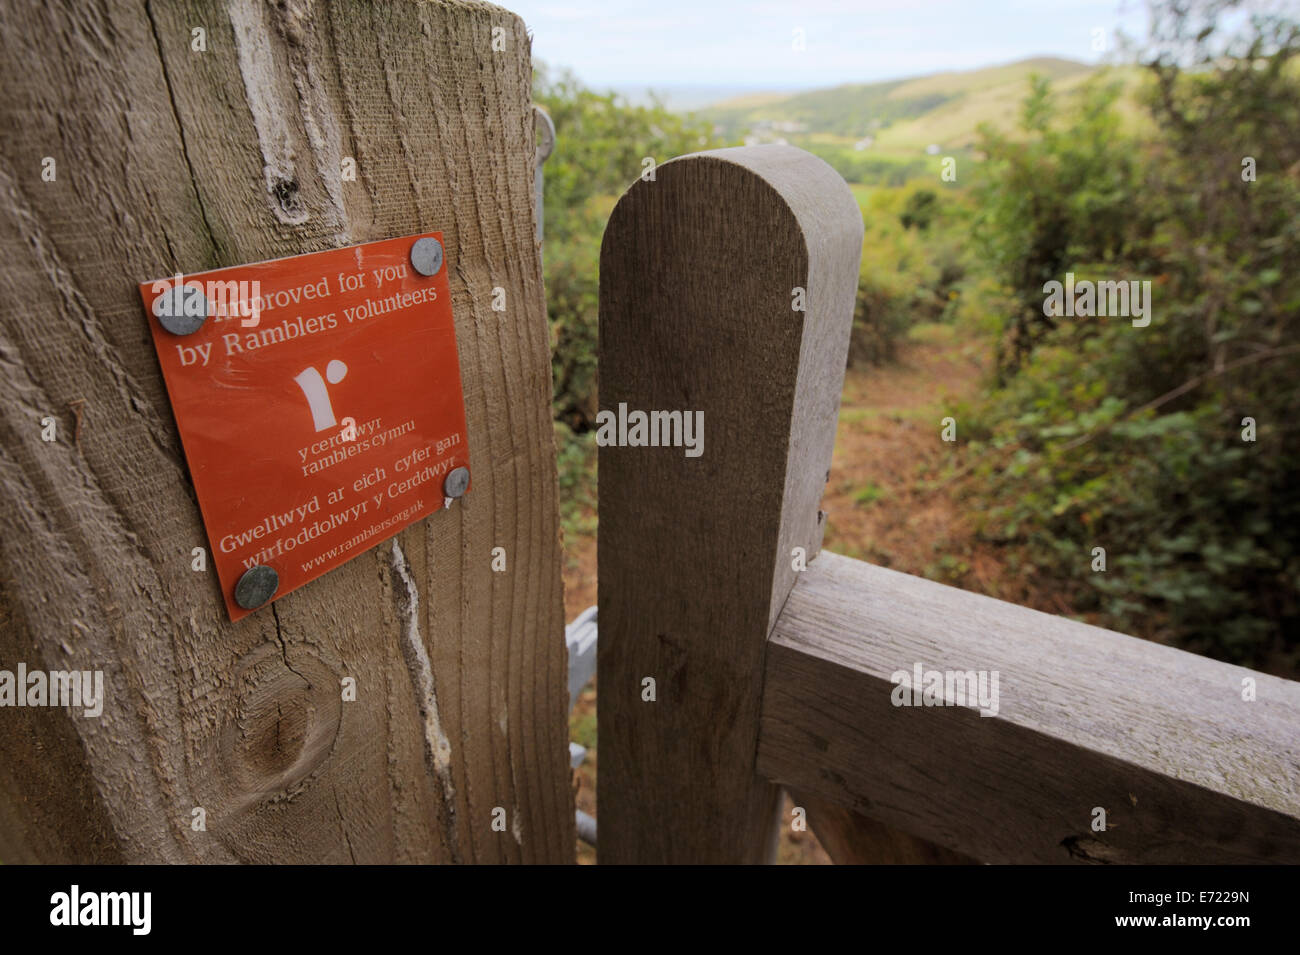 Wooden gate installed on a public right of way footpath by Ramblers volunteers, Llanrhystud, Wales, UK. Stock Photo